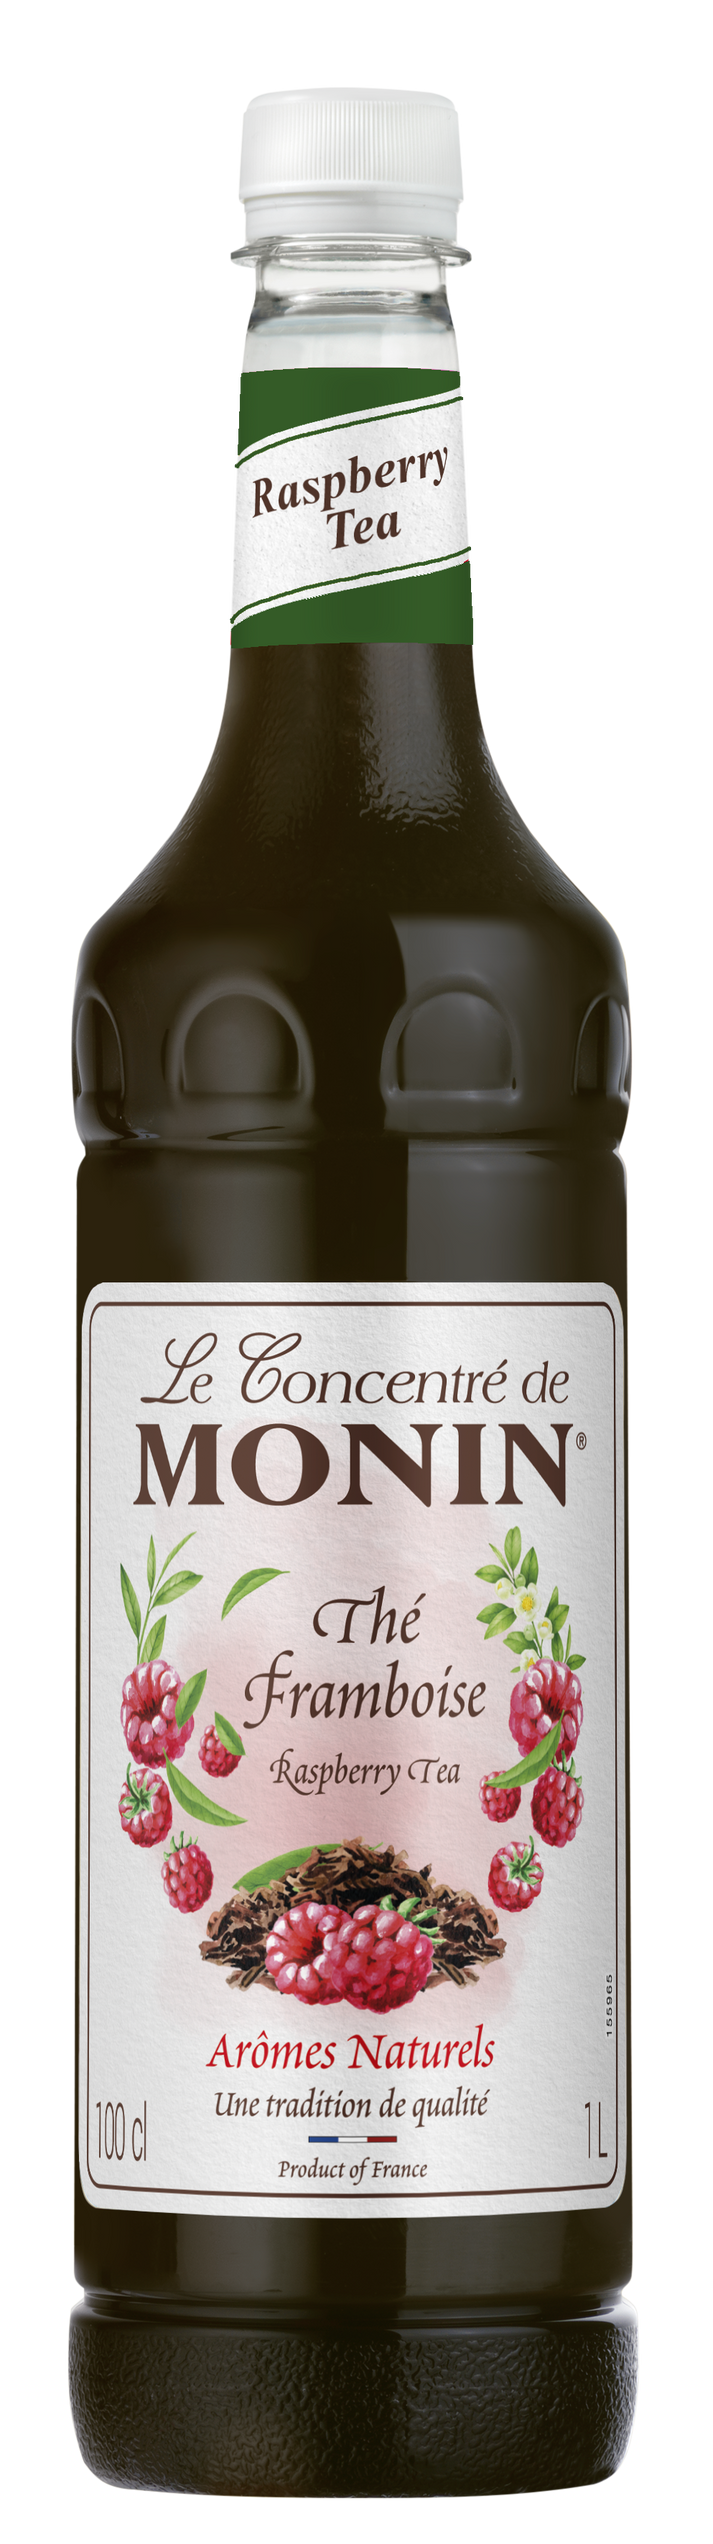 Buy MONIN Raspberry Tea Concentrate. It is made using only natural ingredients, resulting in a mouthwatering & aromatic flavour.